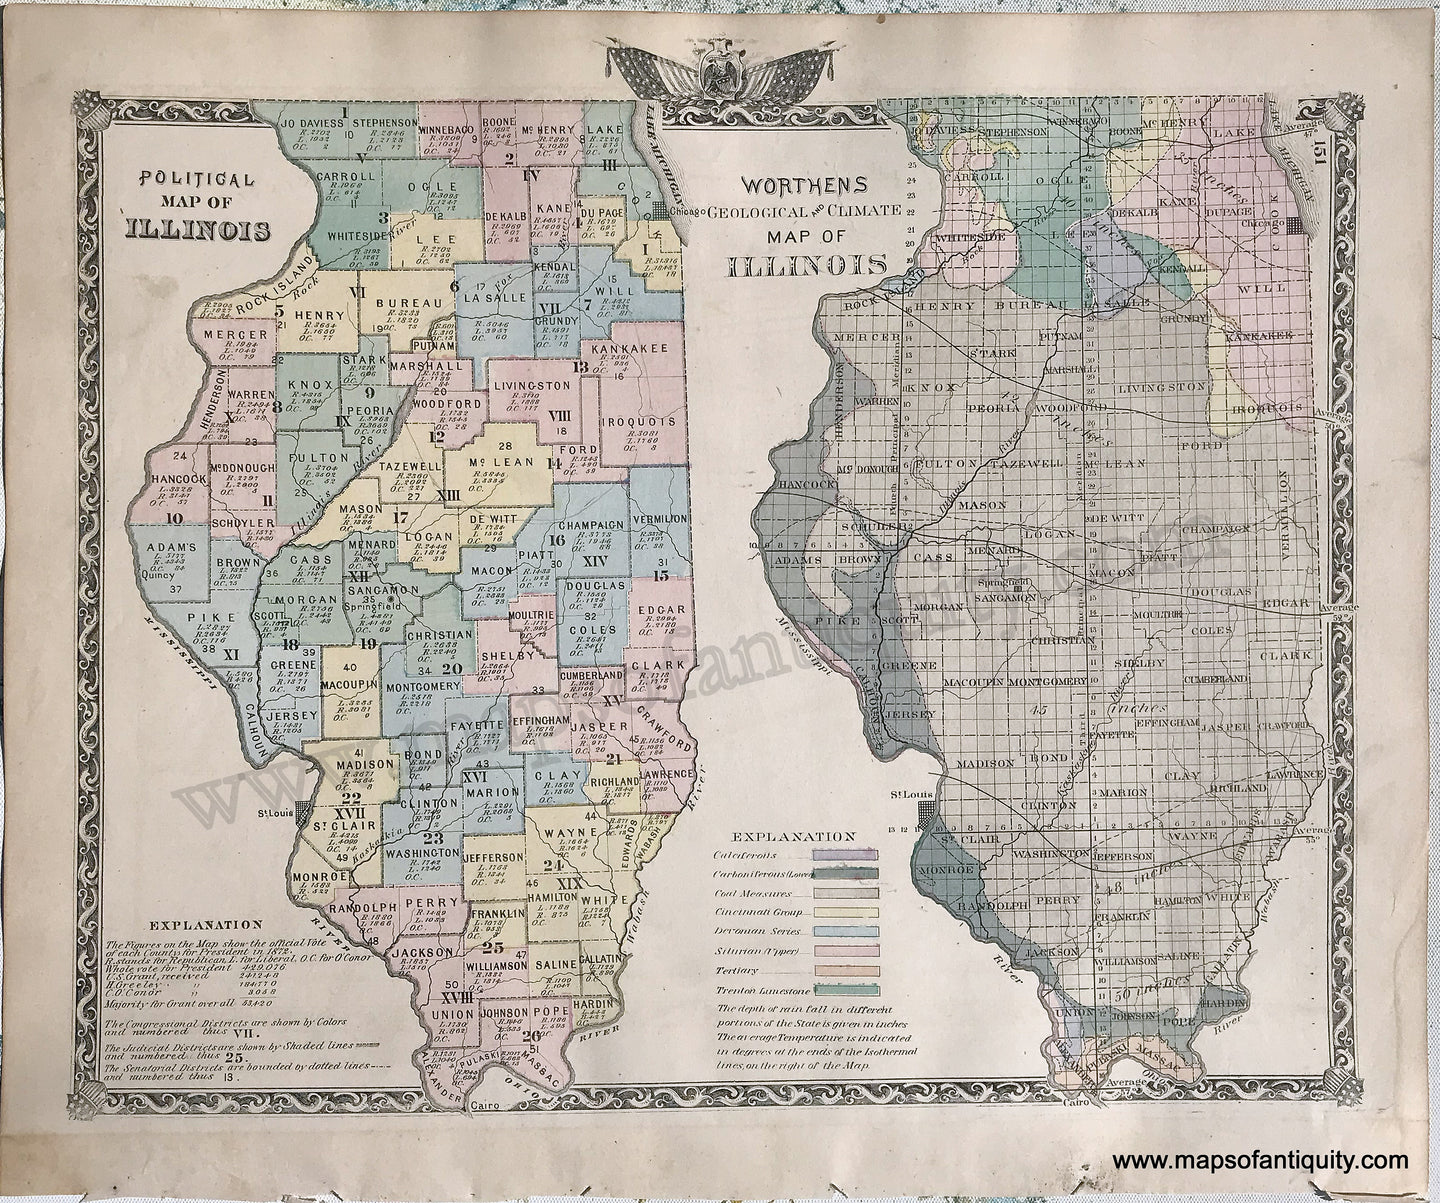 Antique-Hand-Colored-Map-Political-Map-of-Illinois-/-Worthens-Geological-and-Climate-Map-of-Illinois;-verso:-Five-small-cities-of-Illinois-1876-Warner-&-Beers-/-Union-Atlas-Co.-Midwest-1800s-19th-century-Maps-of-Antiquity